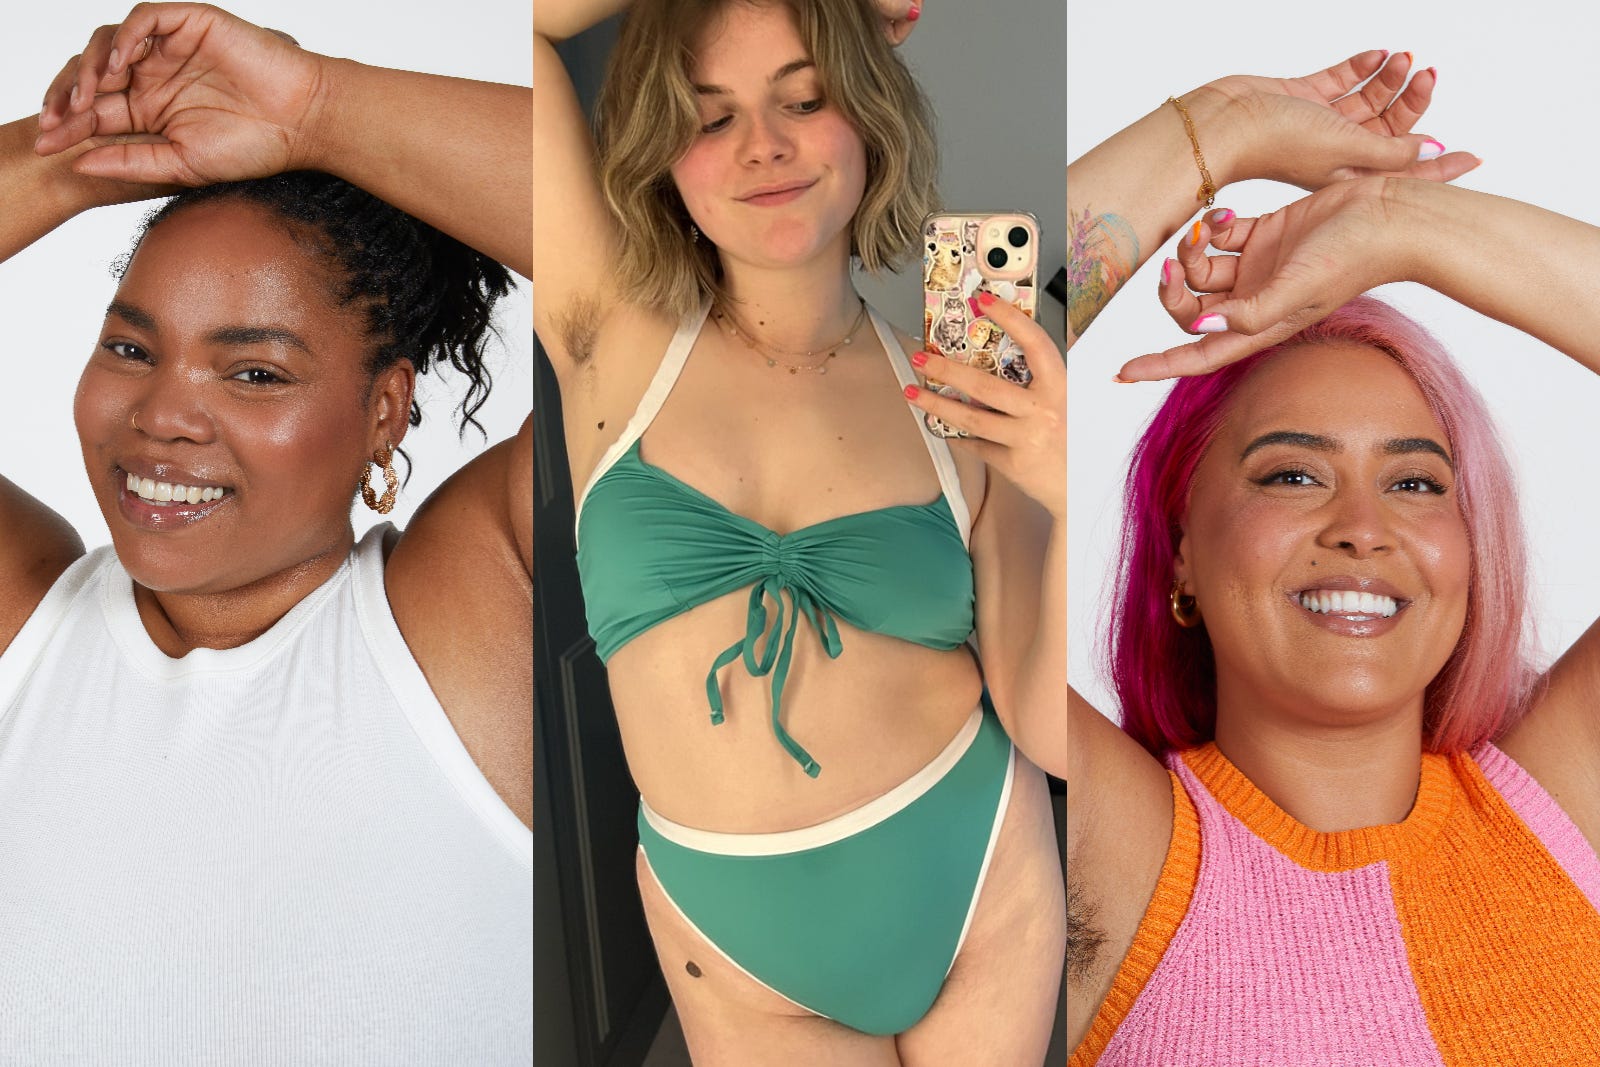 3 People Explain What It's Really Like To Have An Armpit